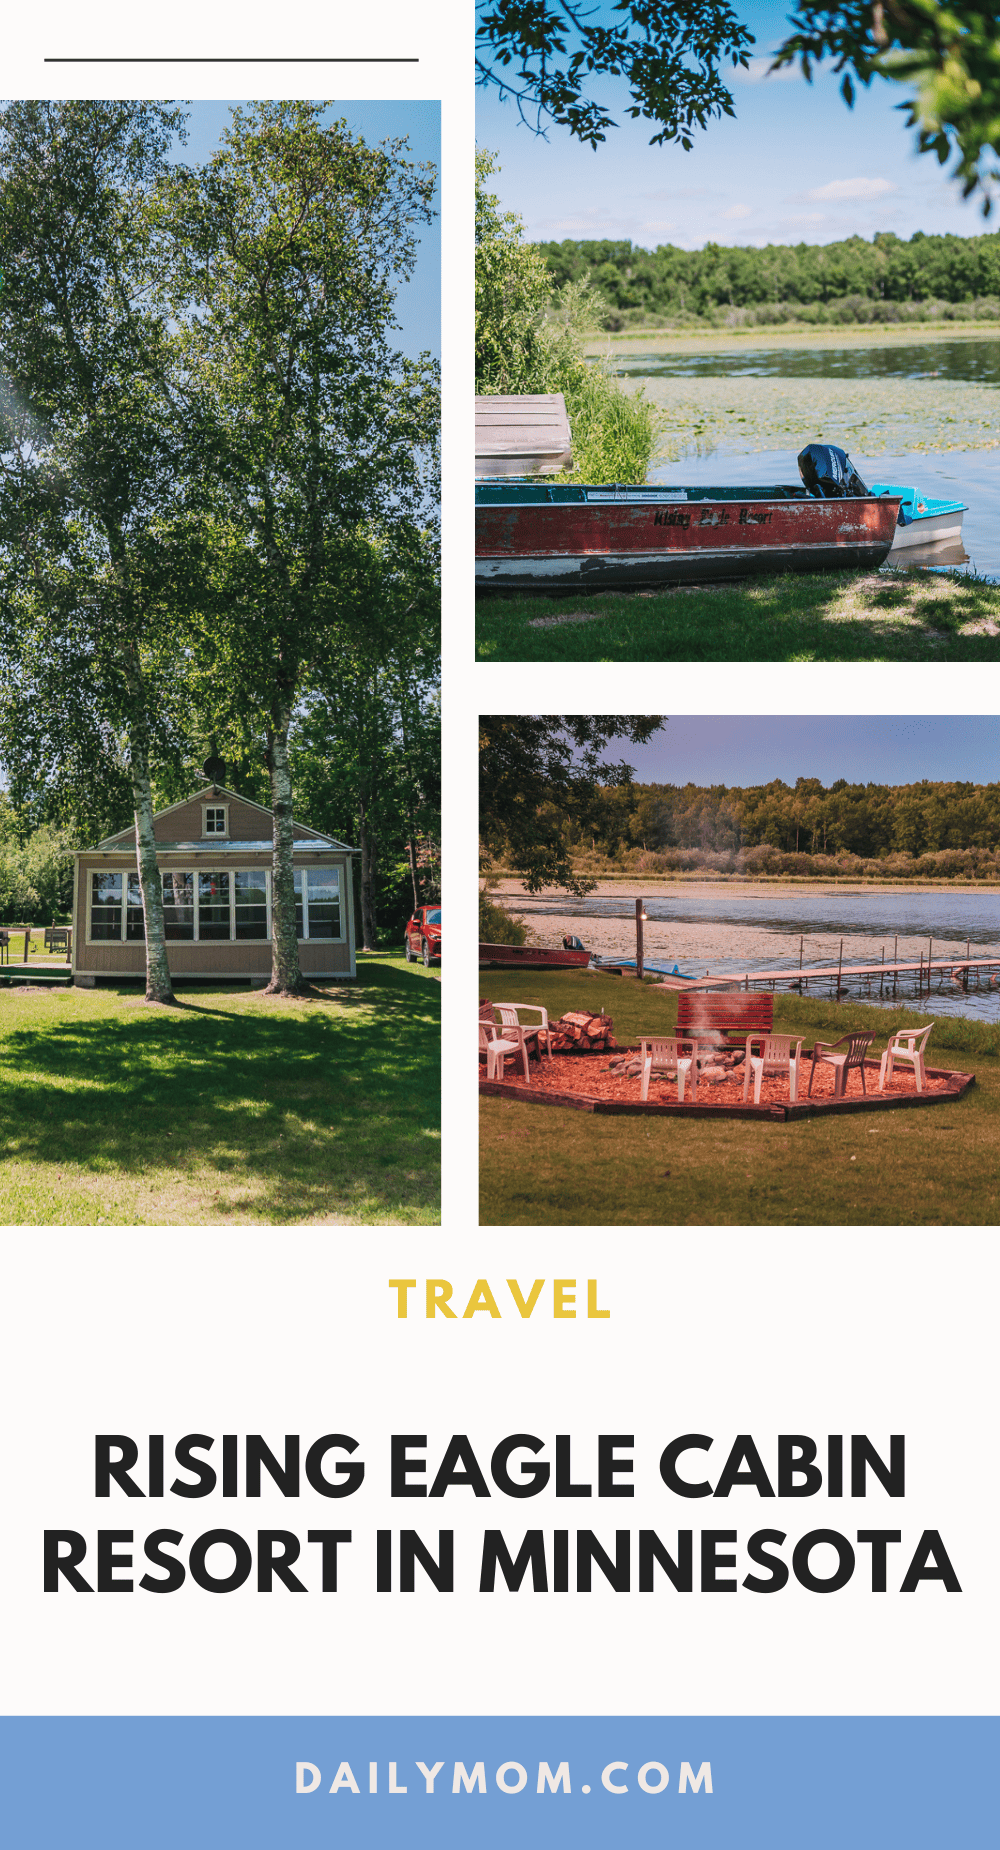 3 Perfect Reasons to Have Your Next Minnesota Vacation at Rising Eagle Resort on Jessie Lake in Talmoon, MN 82 Daily Mom, Magazine for Families